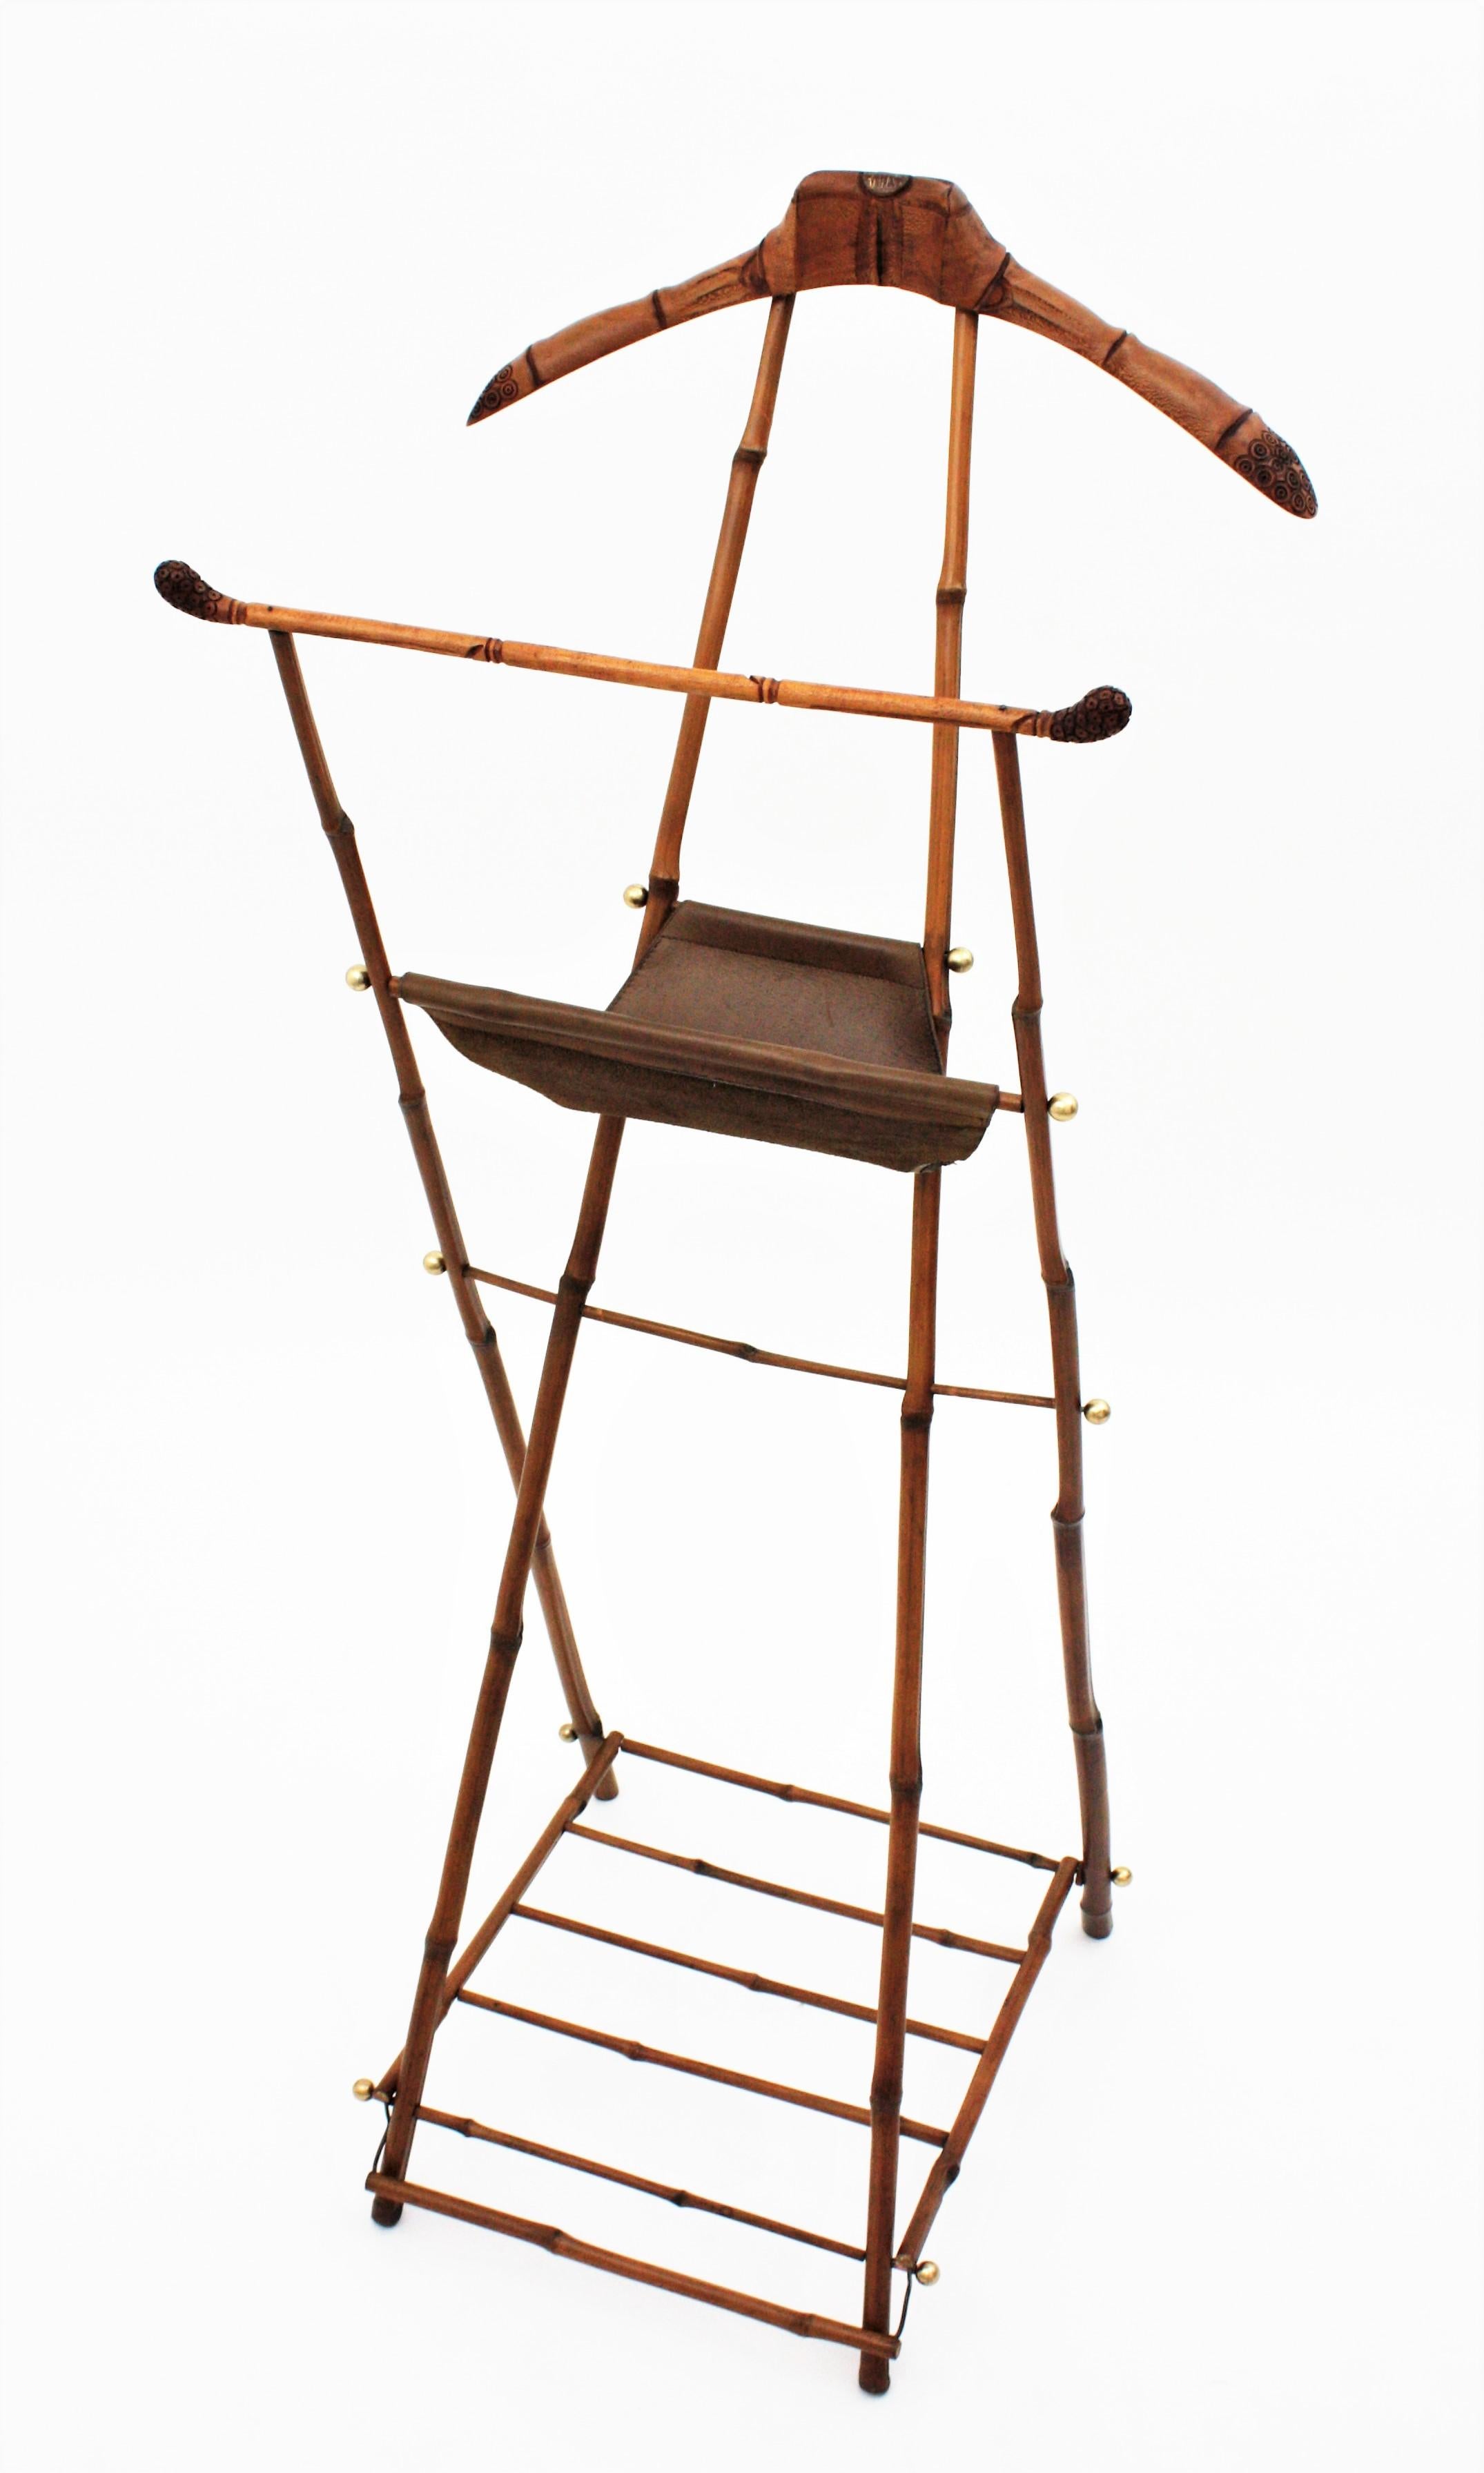 Gorgeous bamboo, wood and leather folding valet with brass accents. Attributed to Jacques Adnet, France, 1950s
This outstanding valet or coat stand is entirely made by hand with bamboo canes and carved wood. It has a leather folding stand and brass